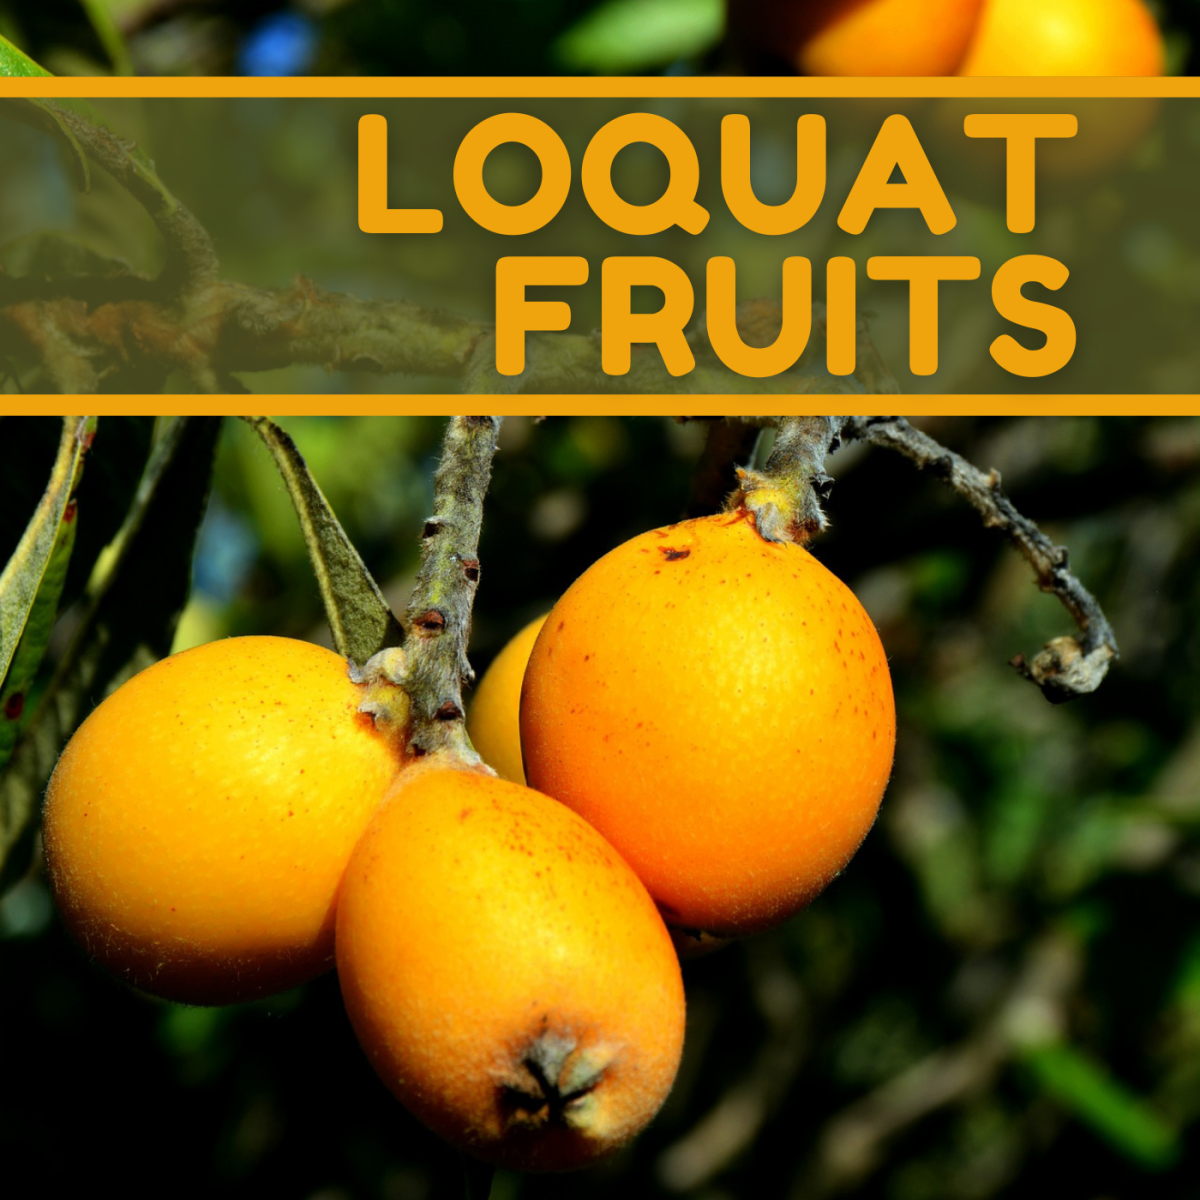 What Are the Health Benefits of Eating Loquat Fruits?